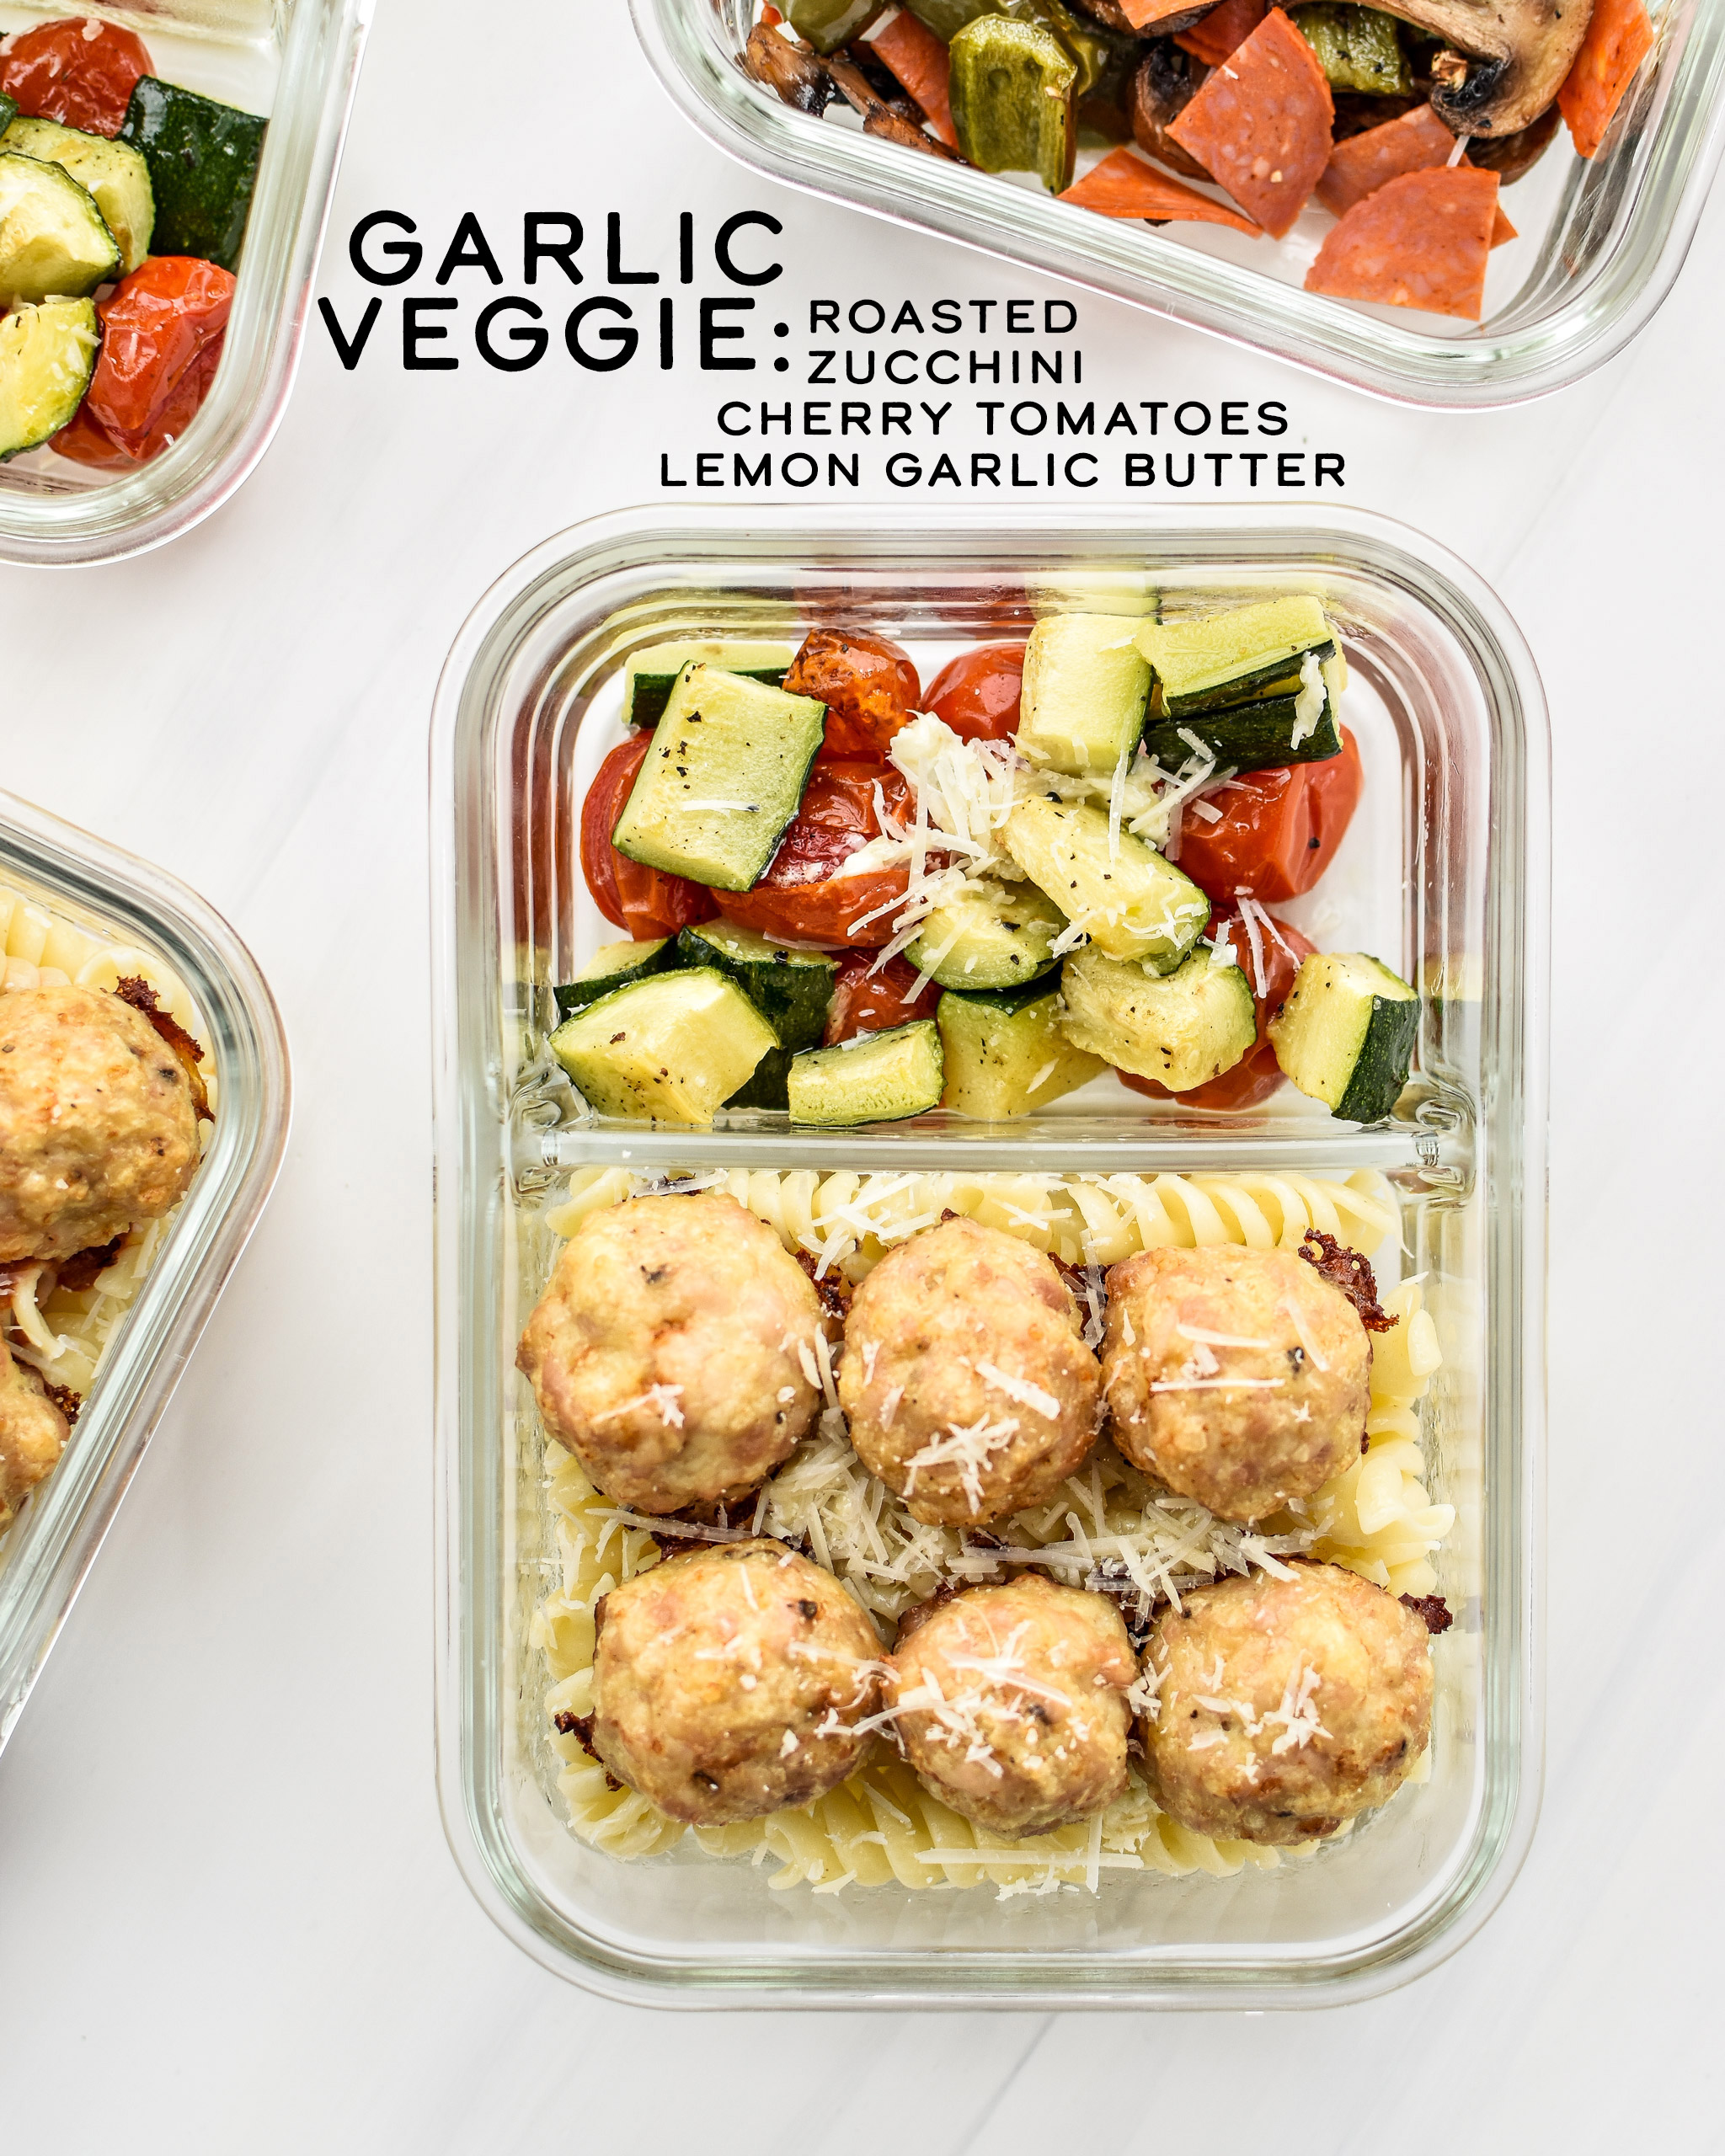 Garlic Veggie Version of the chicken meatballs two ways meal prep lunches